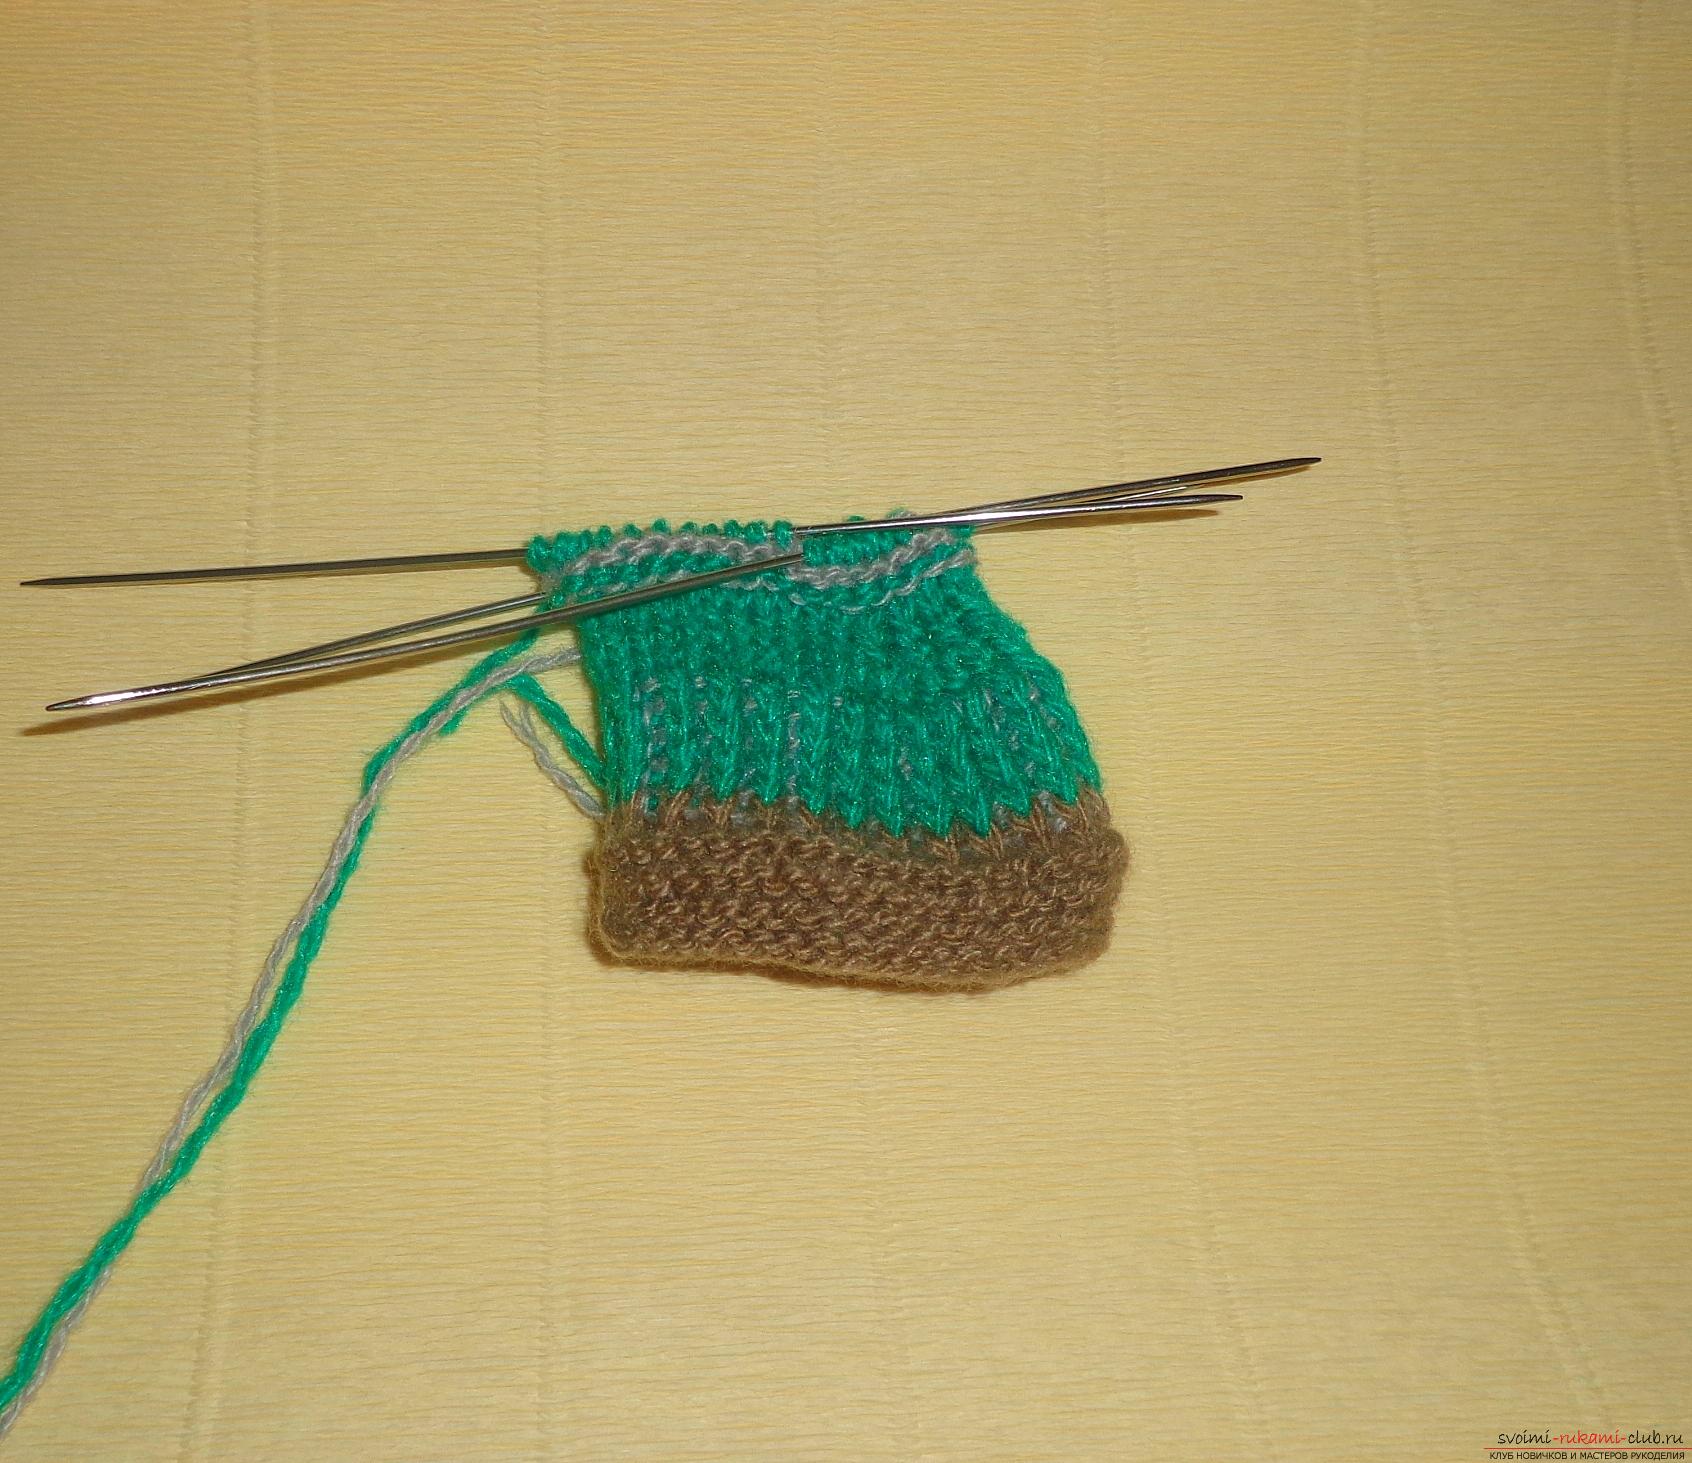 Photos for a lesson on knitting on knitting needles for a boy. Photo №7